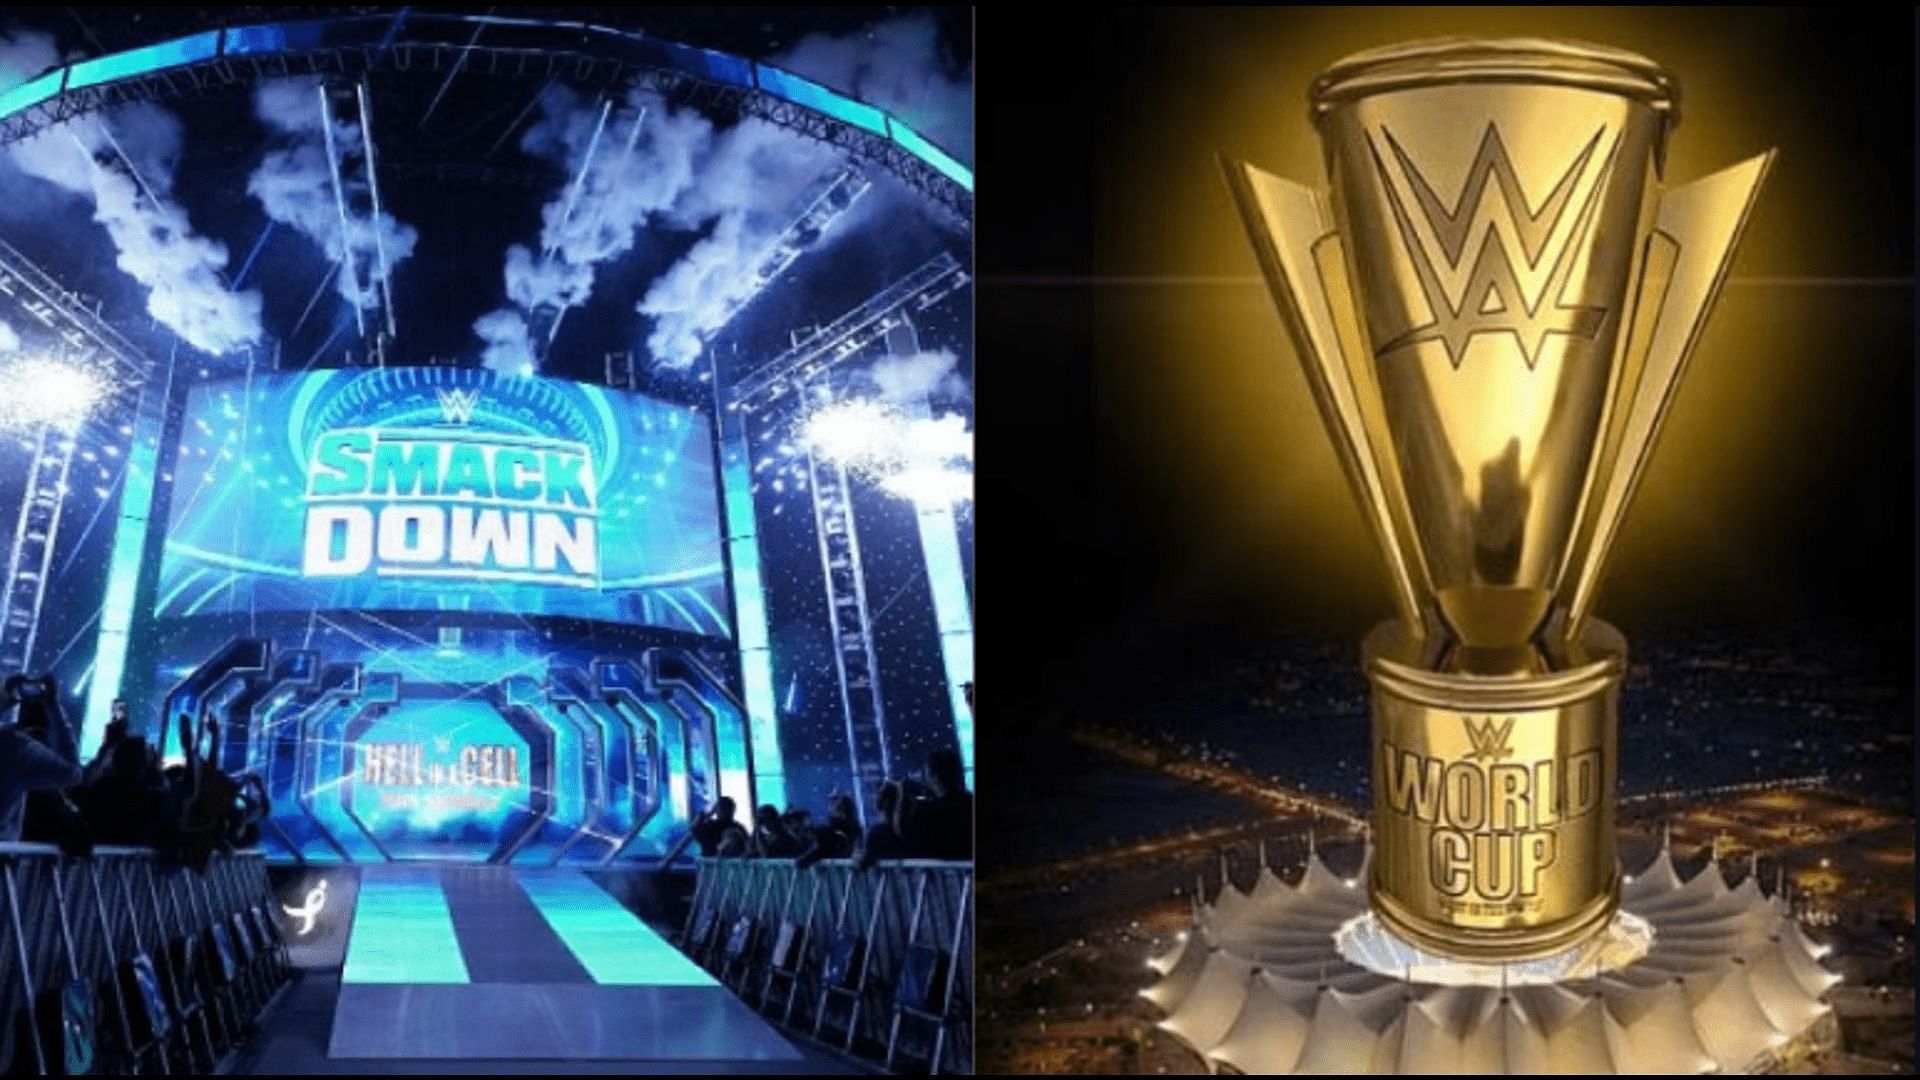 The upcoming SmackDown episode will feature the finals of the World Cup tournament